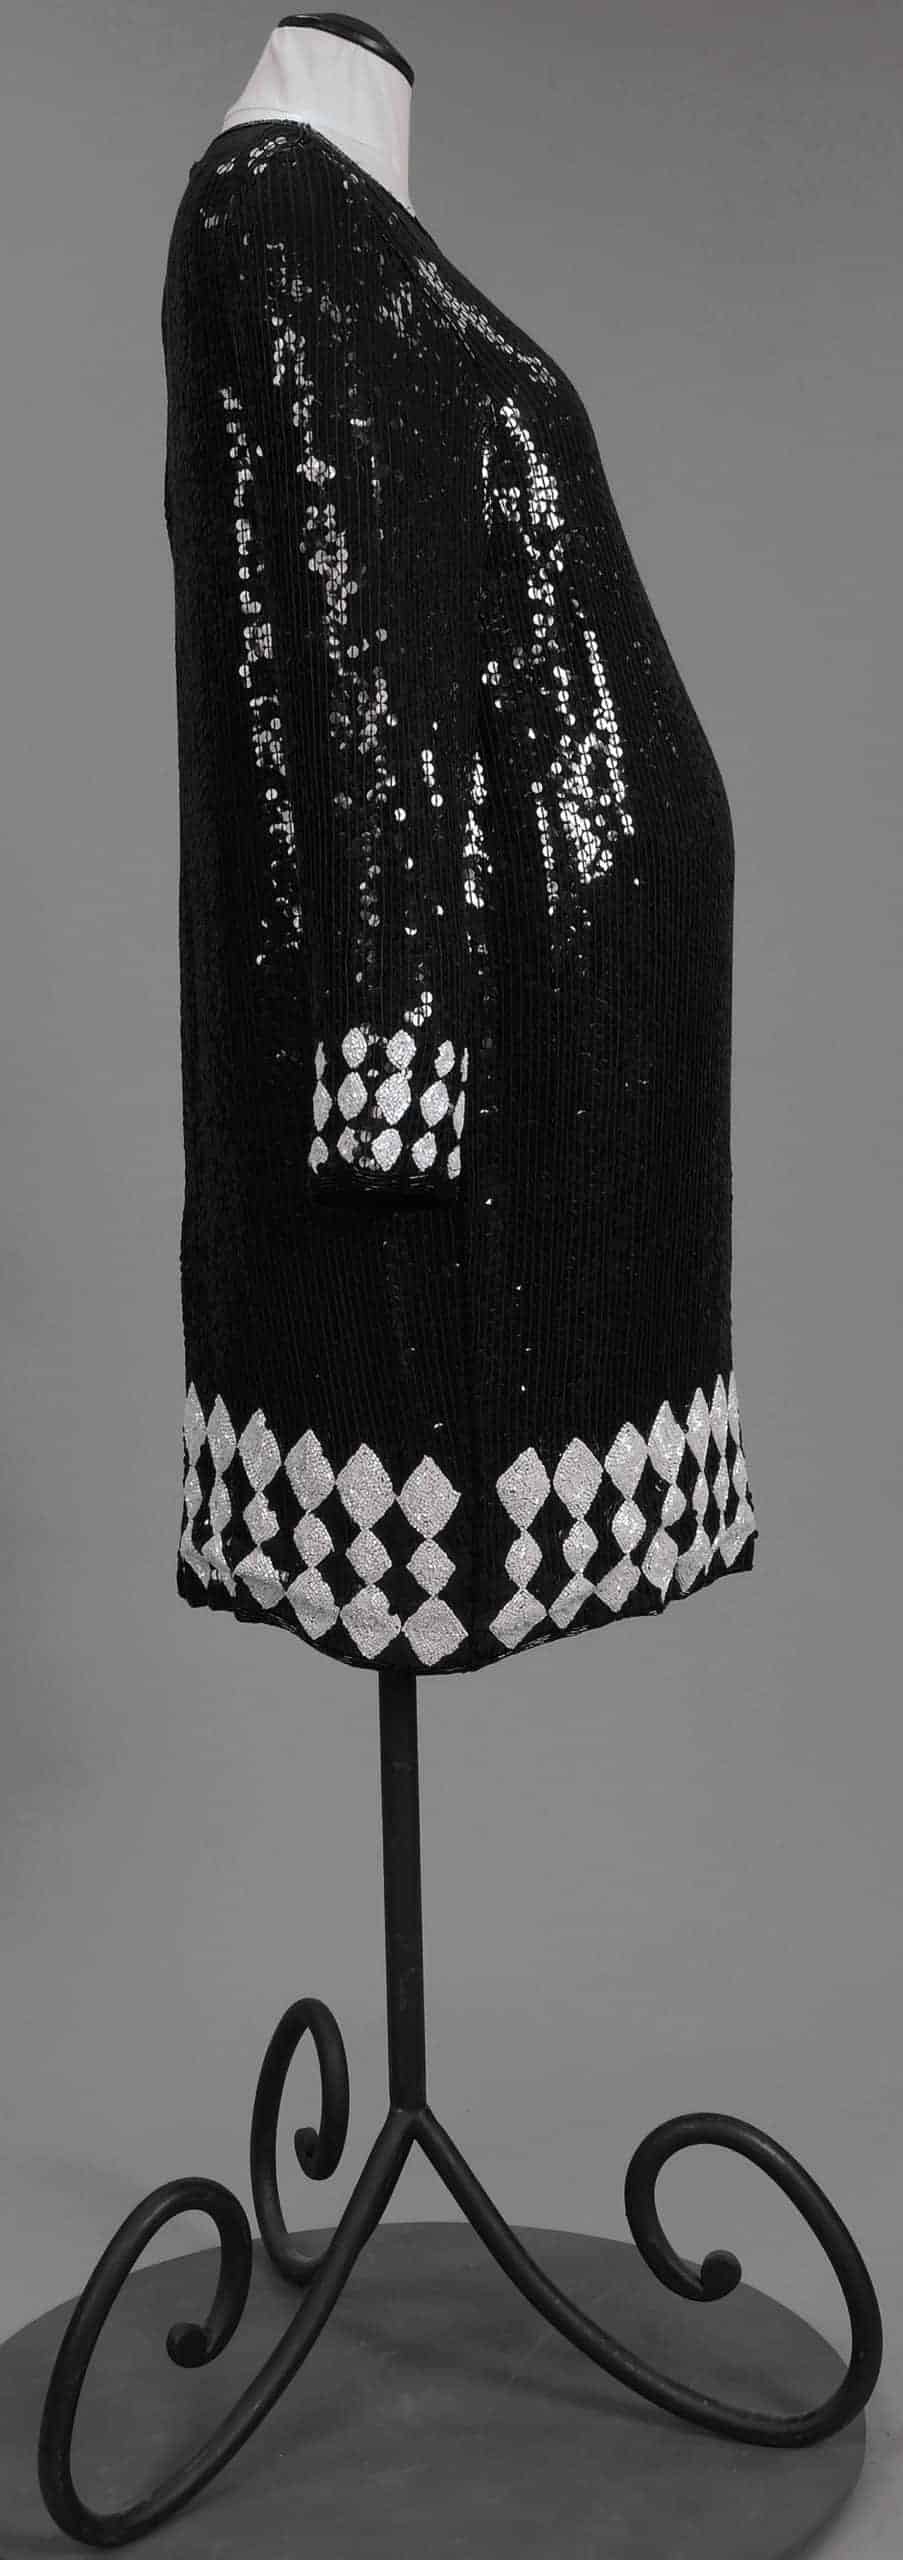 Maternity cocktail dress by Pageboy, 1990